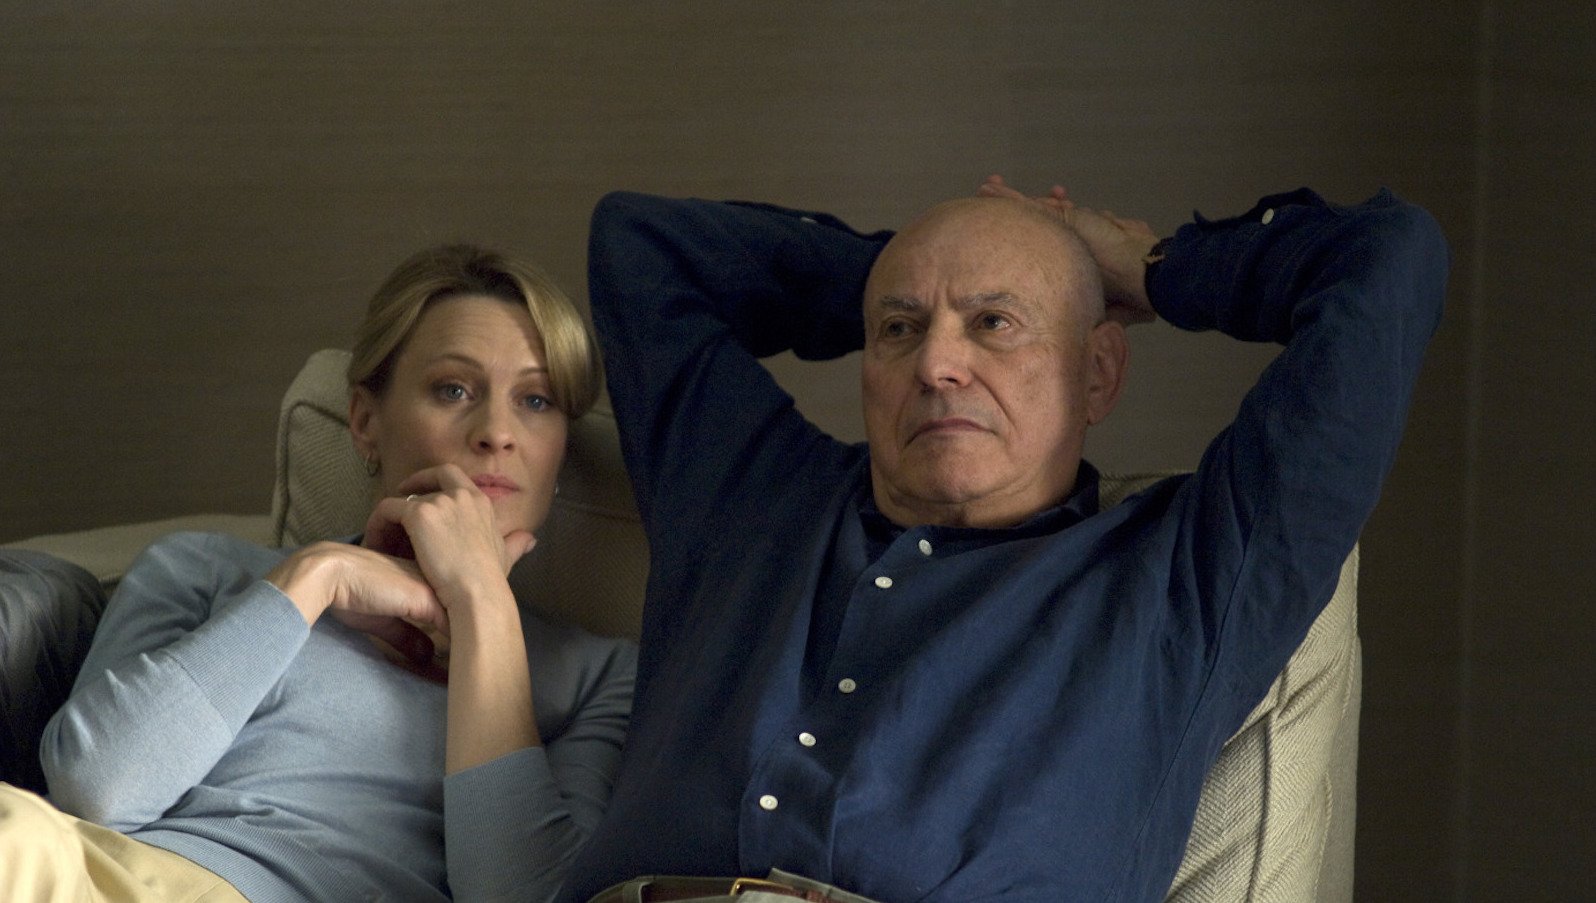 A man and woman lie in bed, both wearing blue shirts. His arms are behind his head and her hand is cradling her chin. Both are pensive.